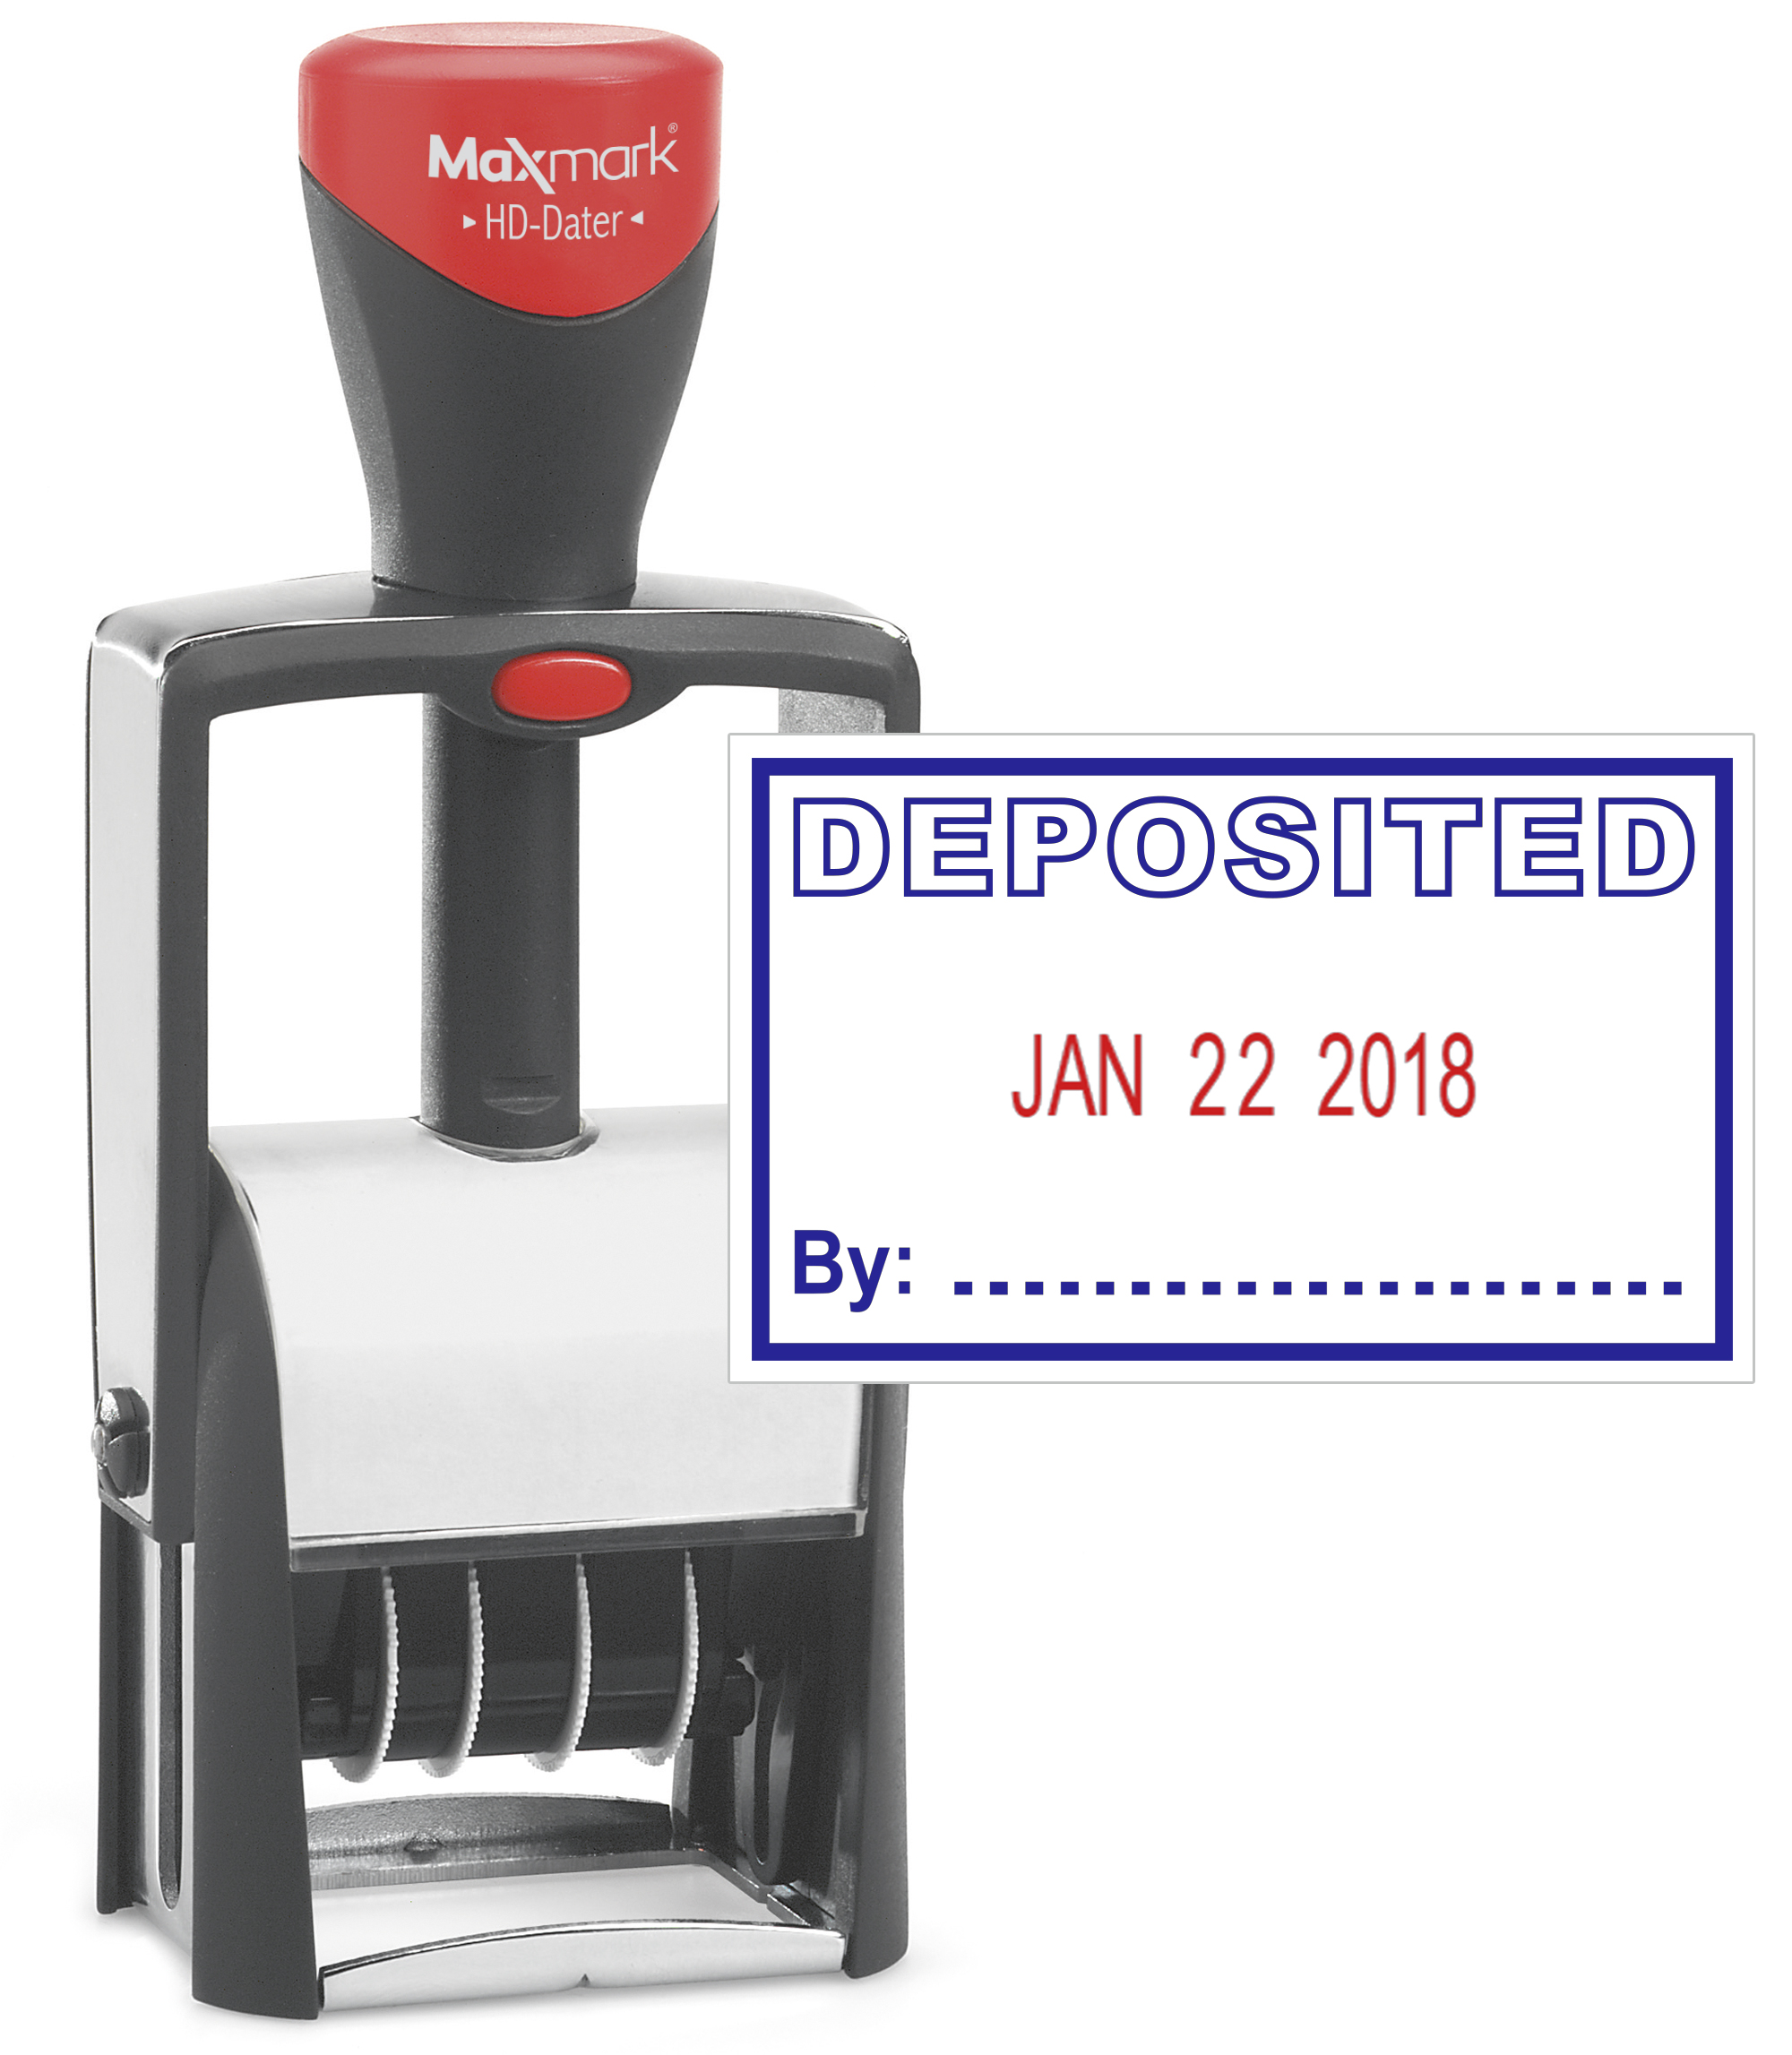 Heavy Duty Date Stamp with "DEPOSITED" Self Inking Stamp - 2 Color Blue/Red Ink